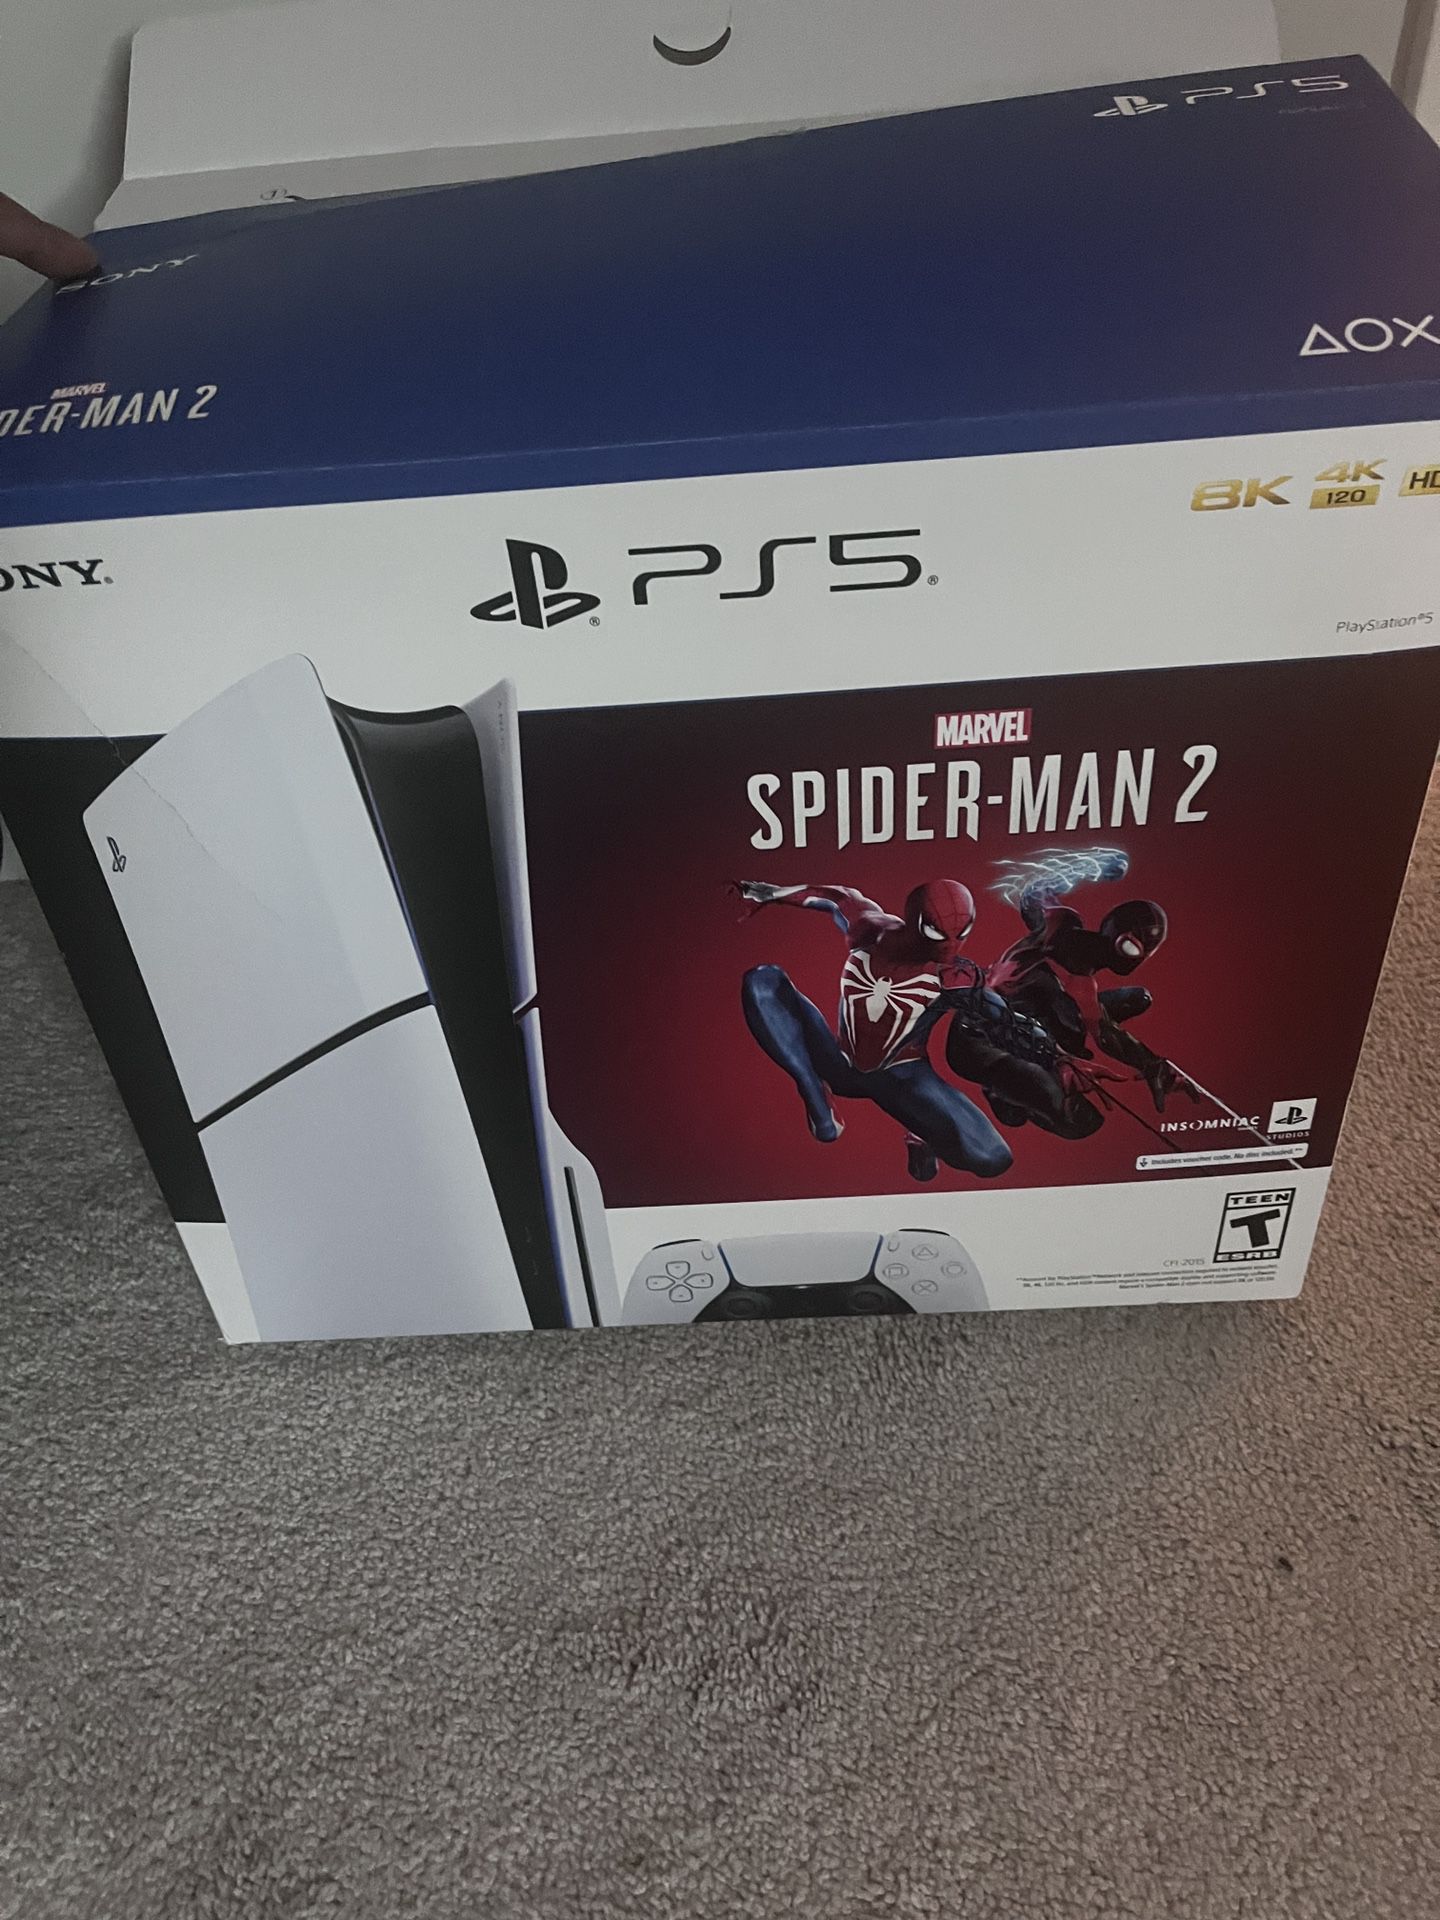 Ps5 Headset And Spider-Man 2 